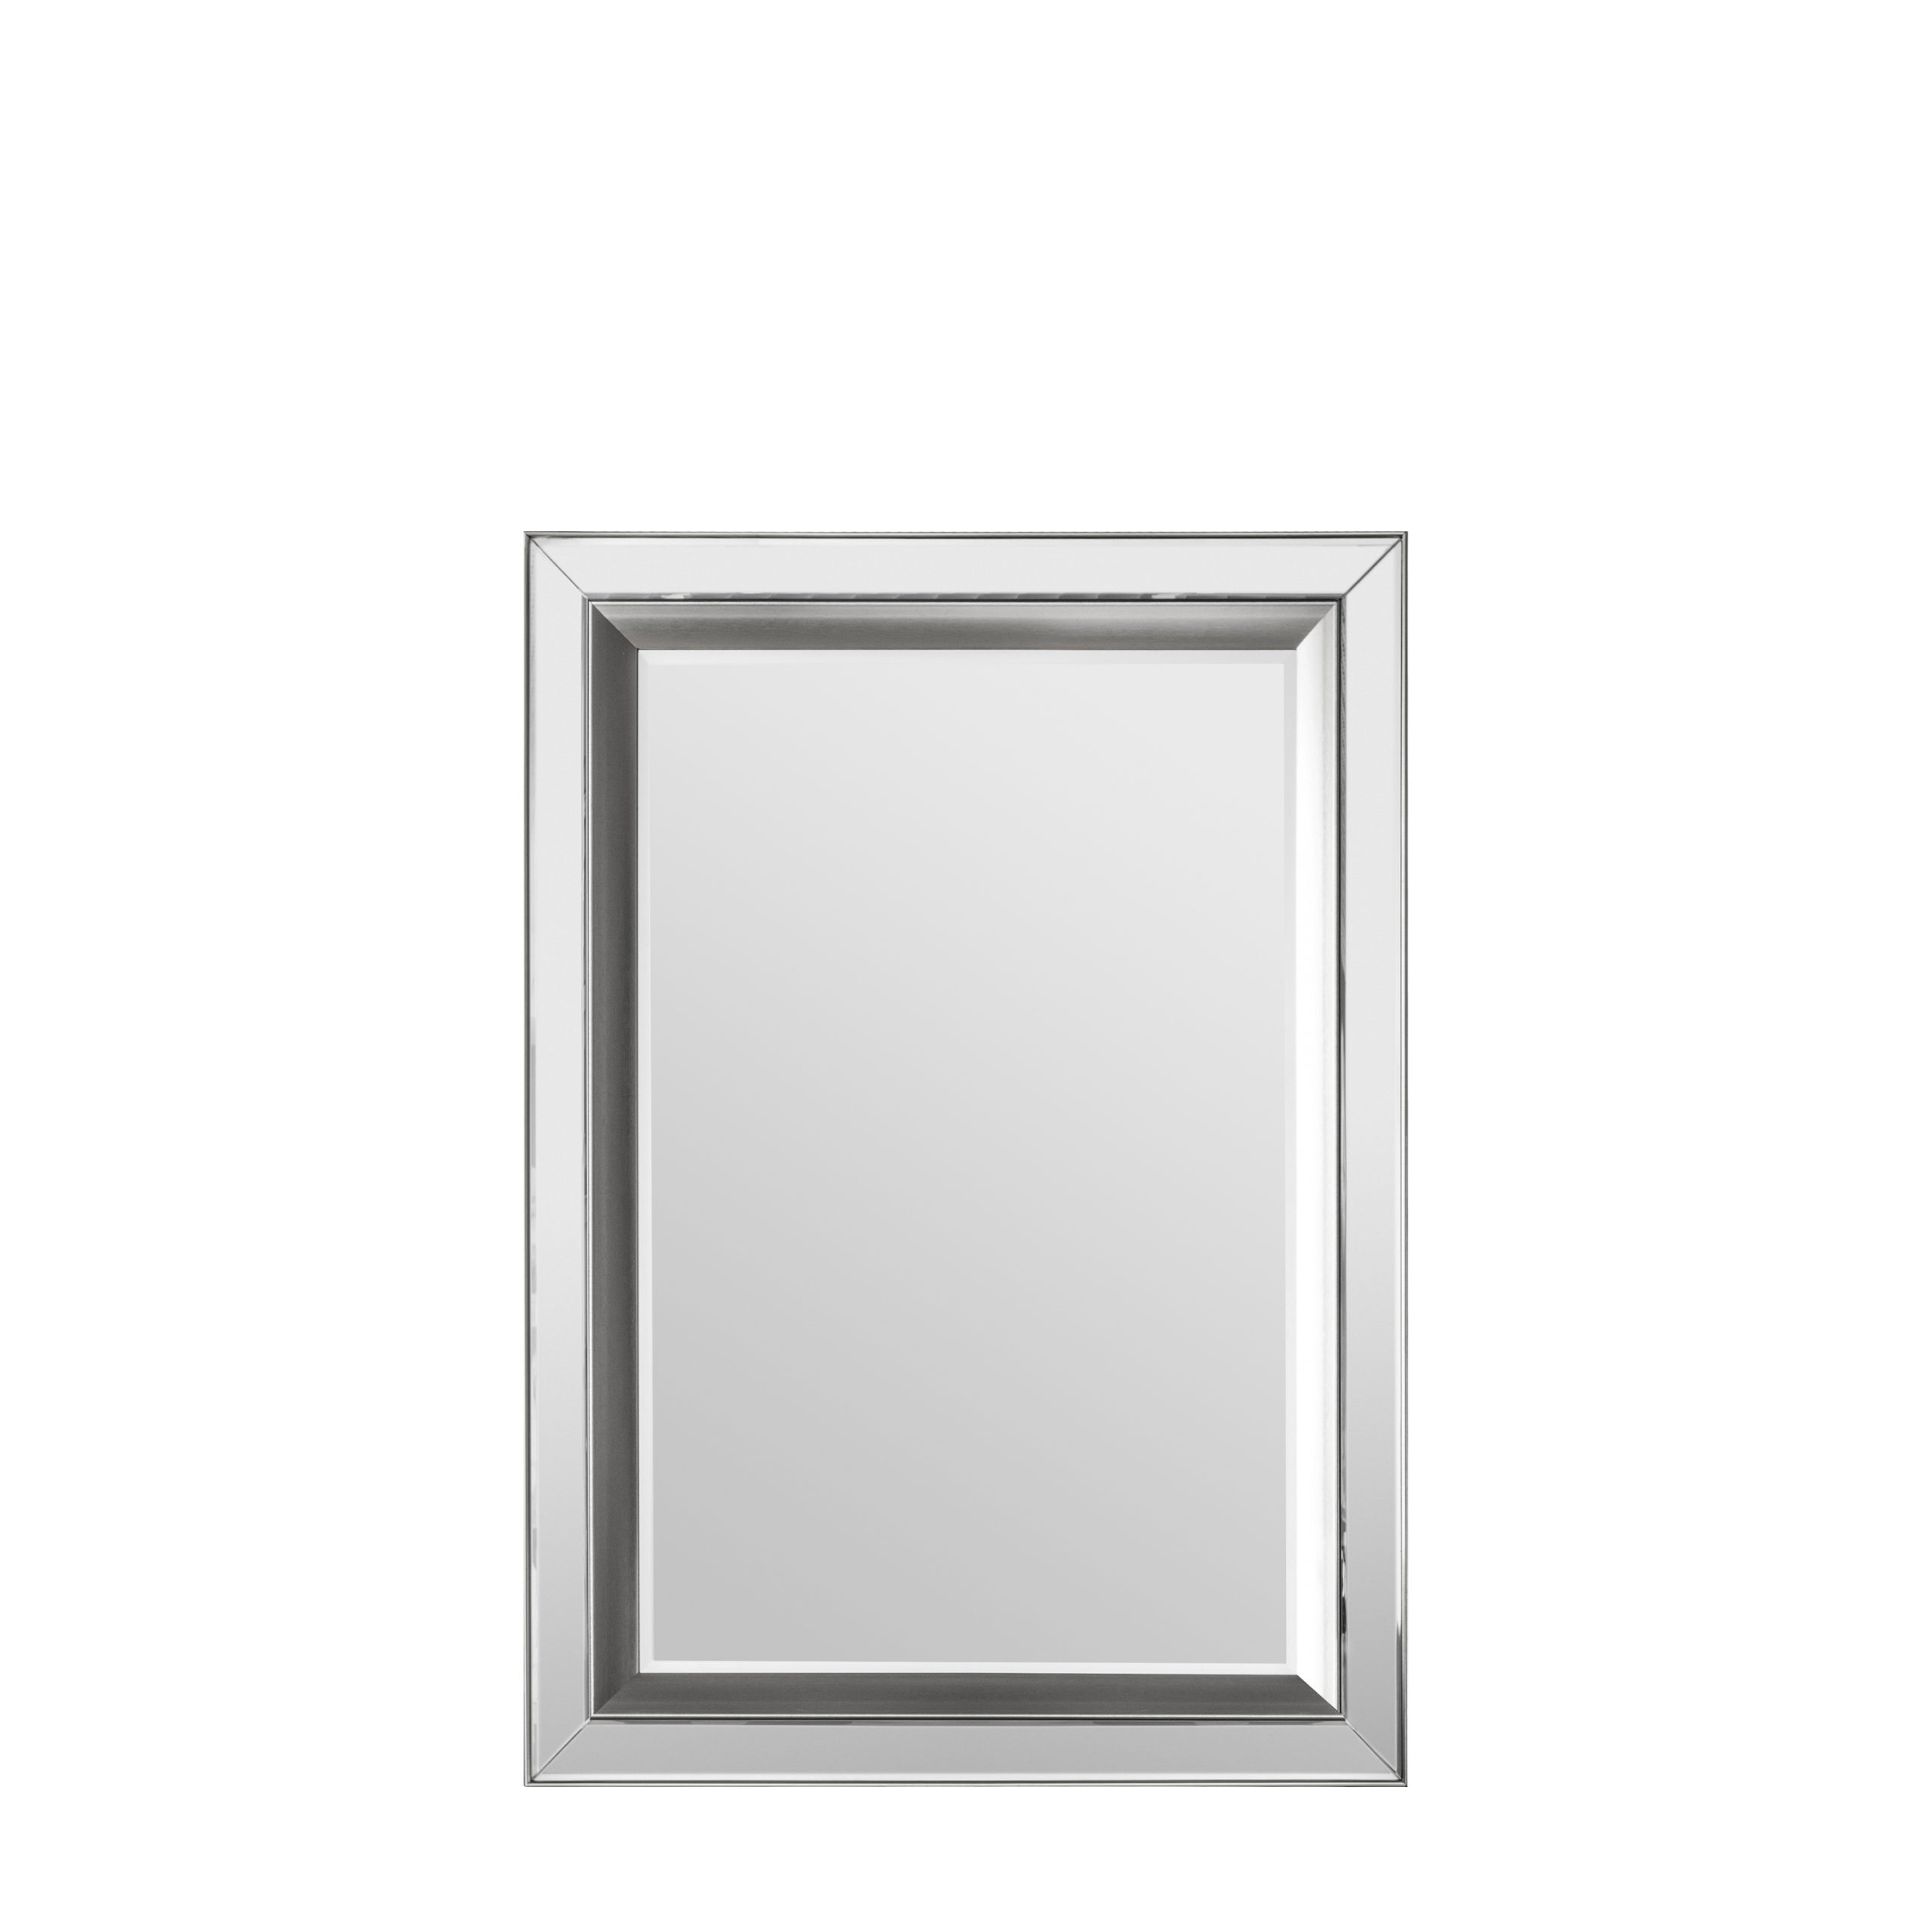 Gallery Direct Madrid Rectangle Mirror